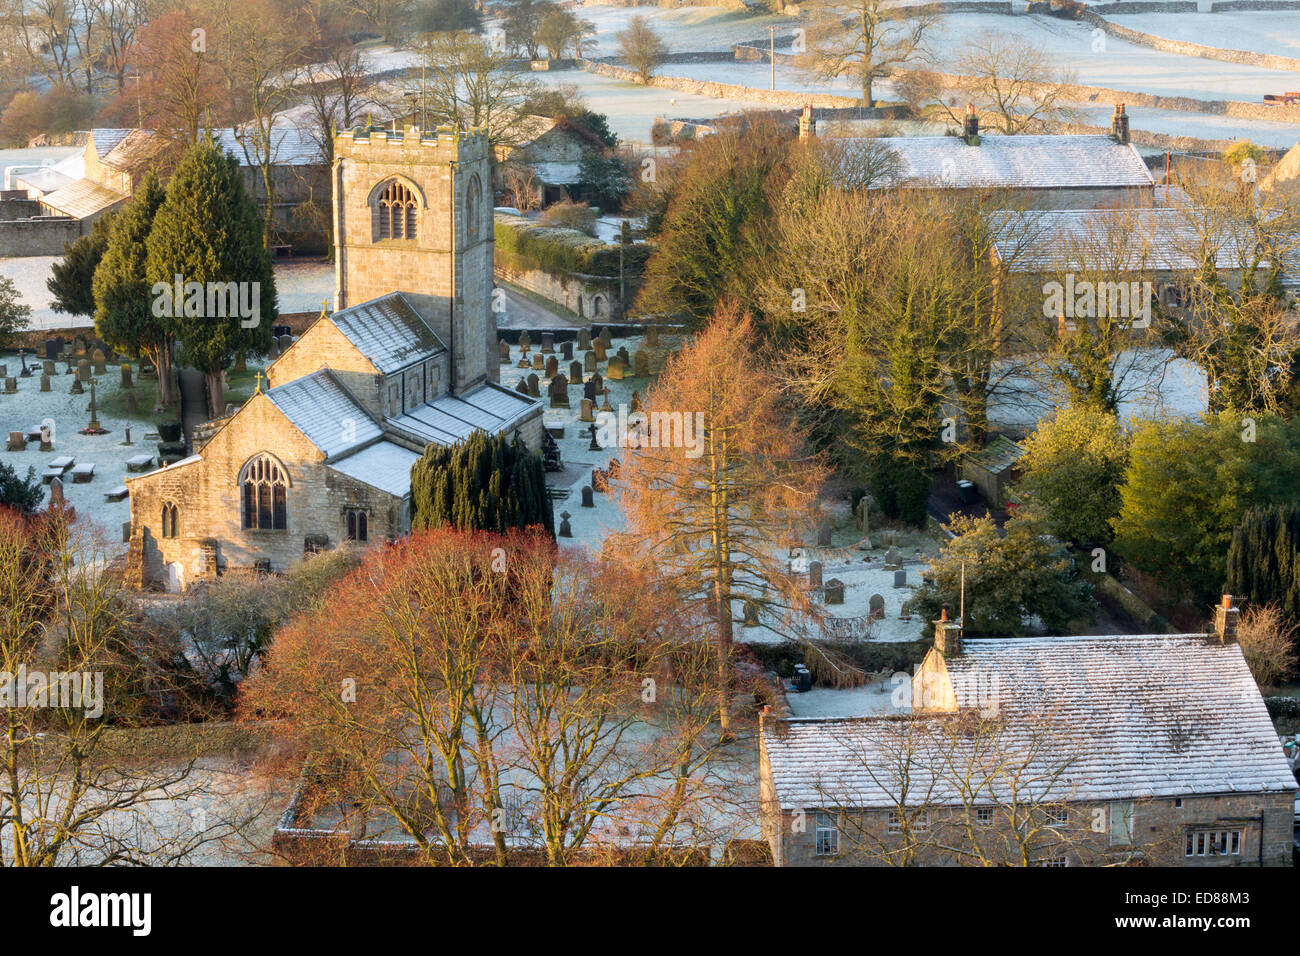 Burnsall village on the River Wharfe in Wharfedale, The Yorkshire Dales, England. Stock Photo